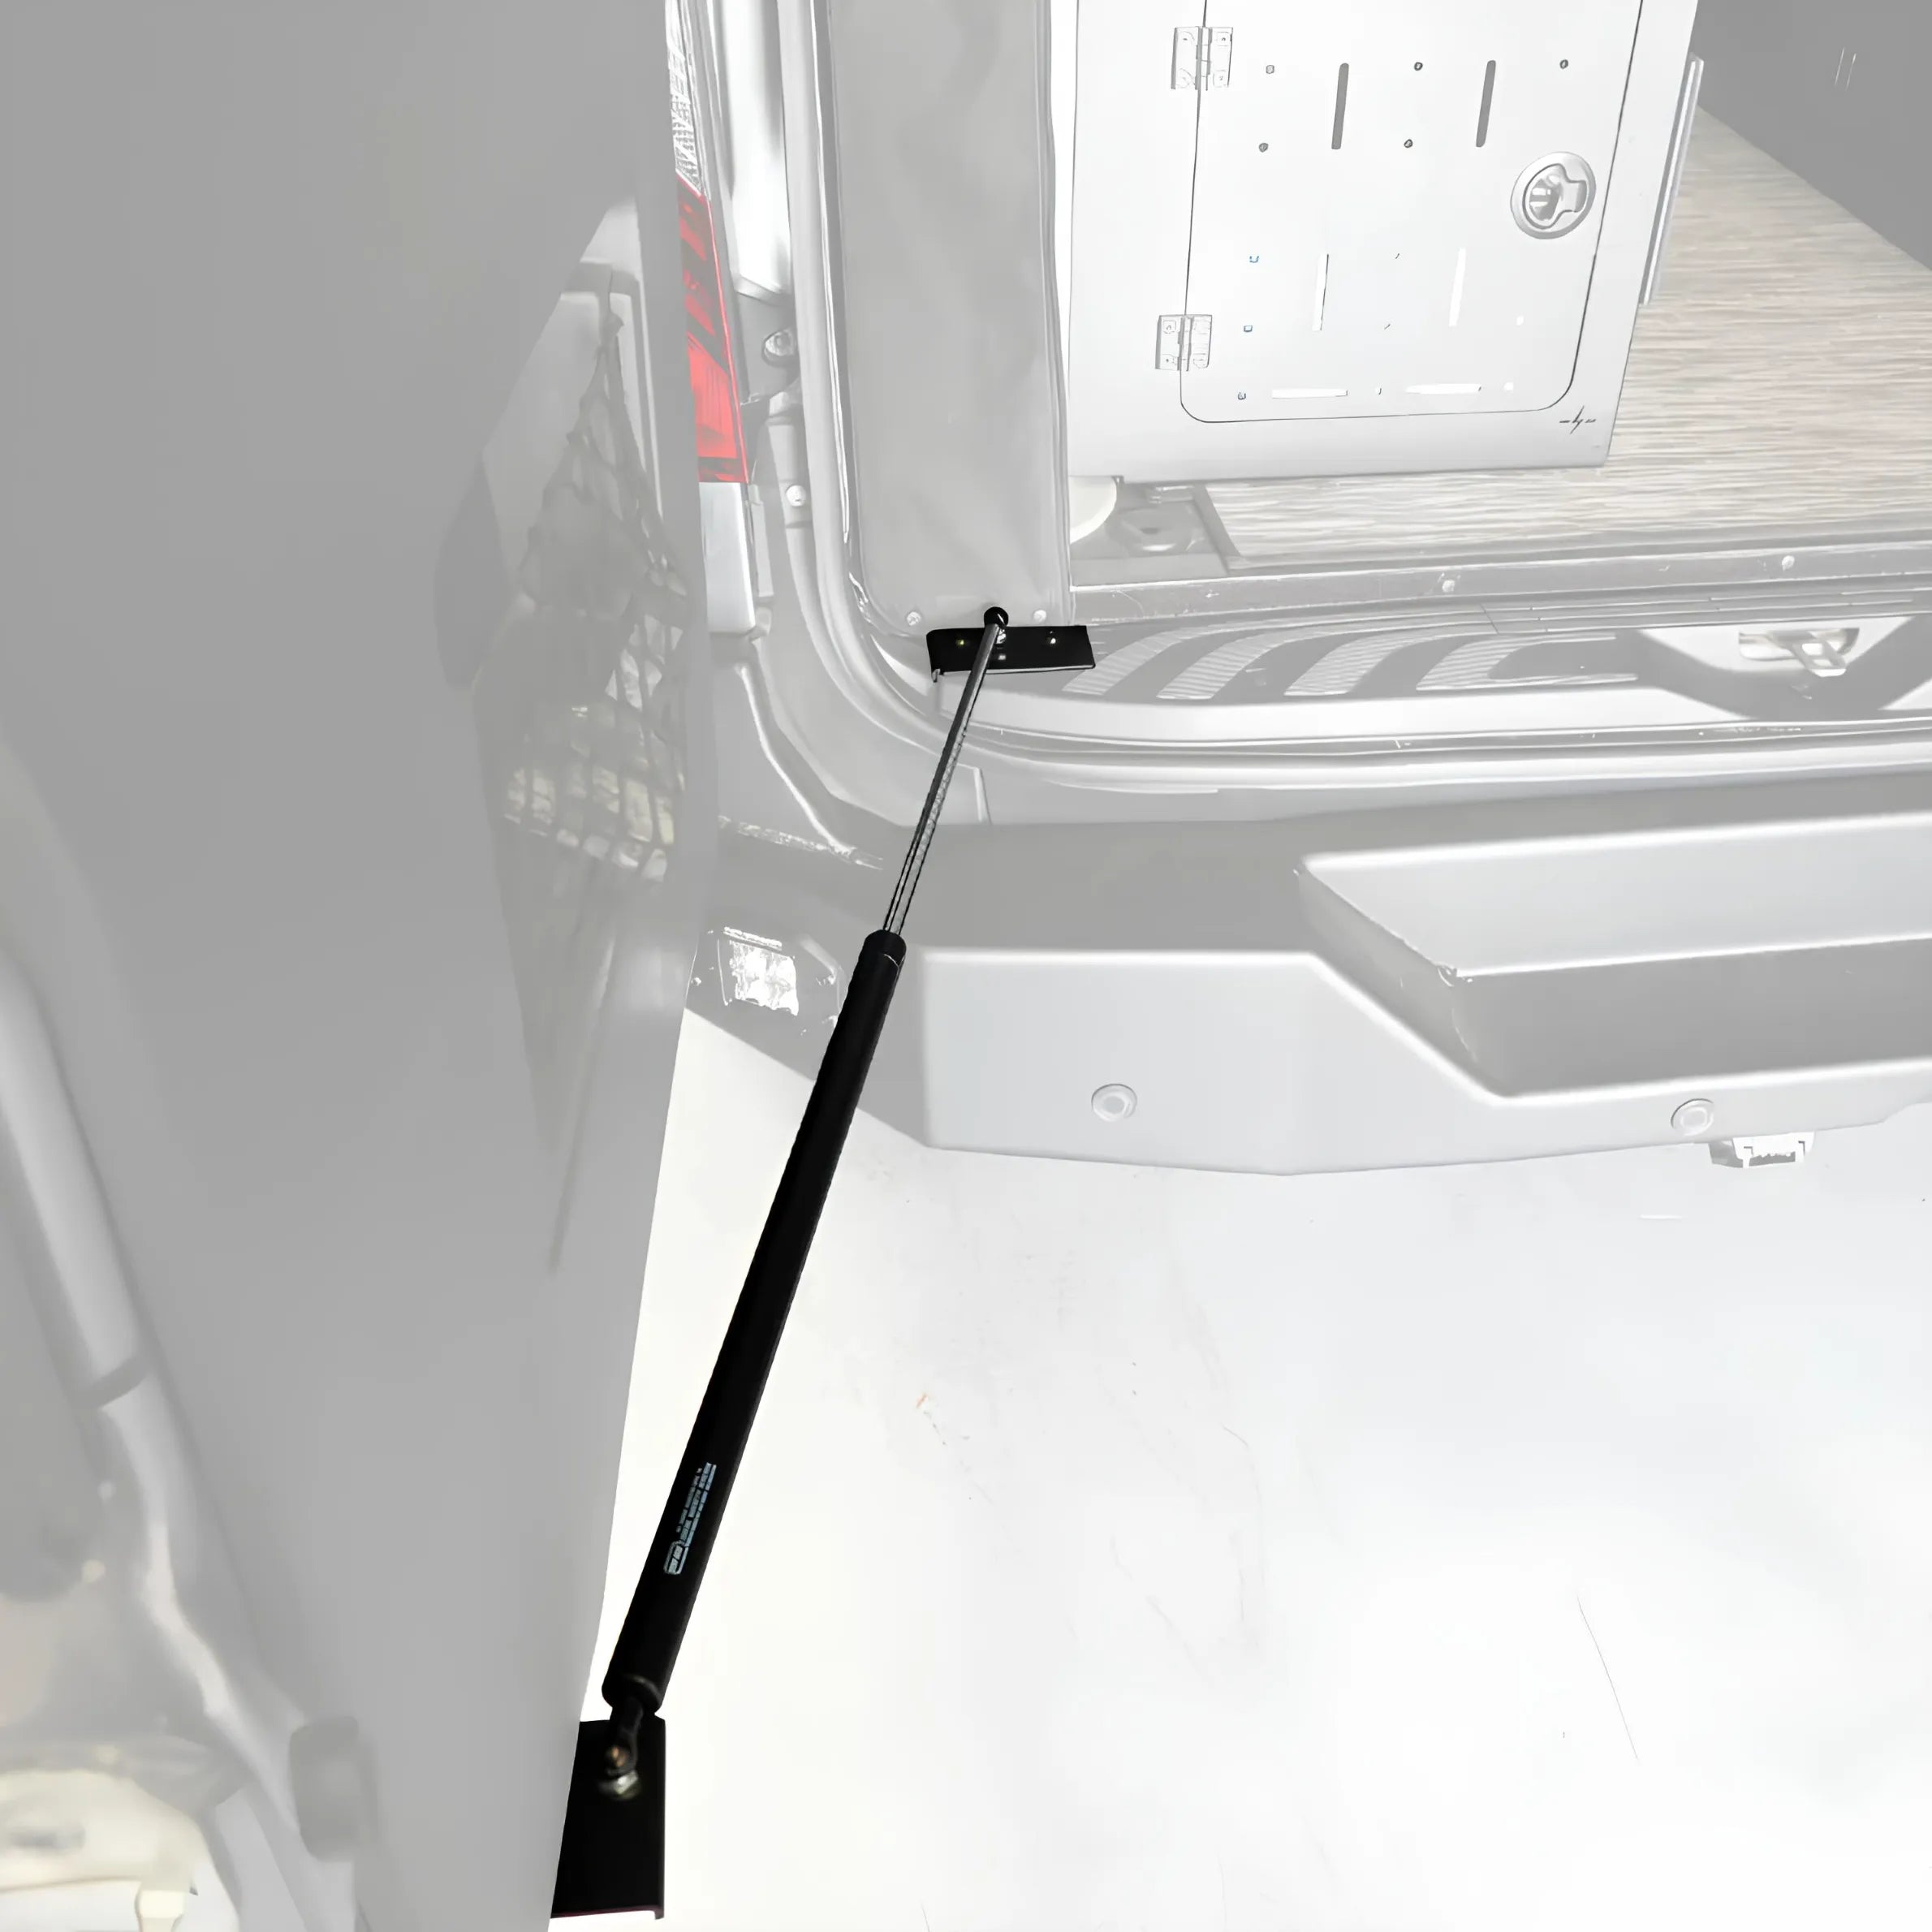 STOP-STAY™ Door Safety System